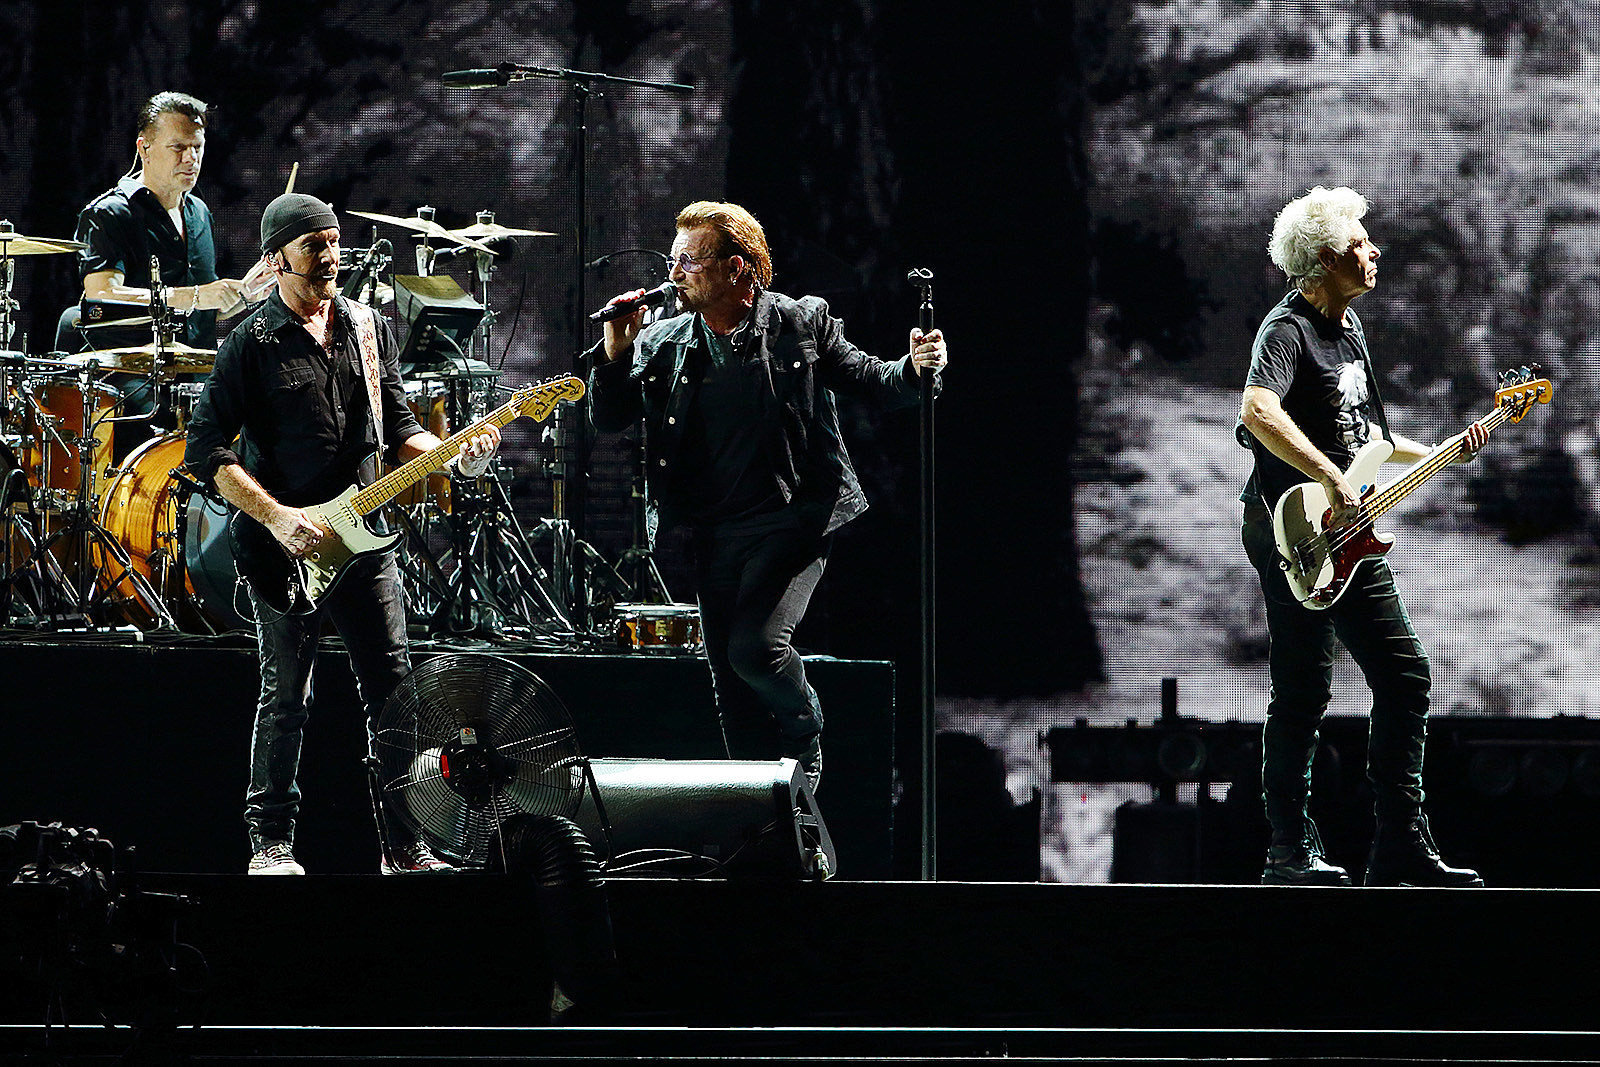 U2’s Adam Clayton in Uncharted Territory Without Larry Mullen